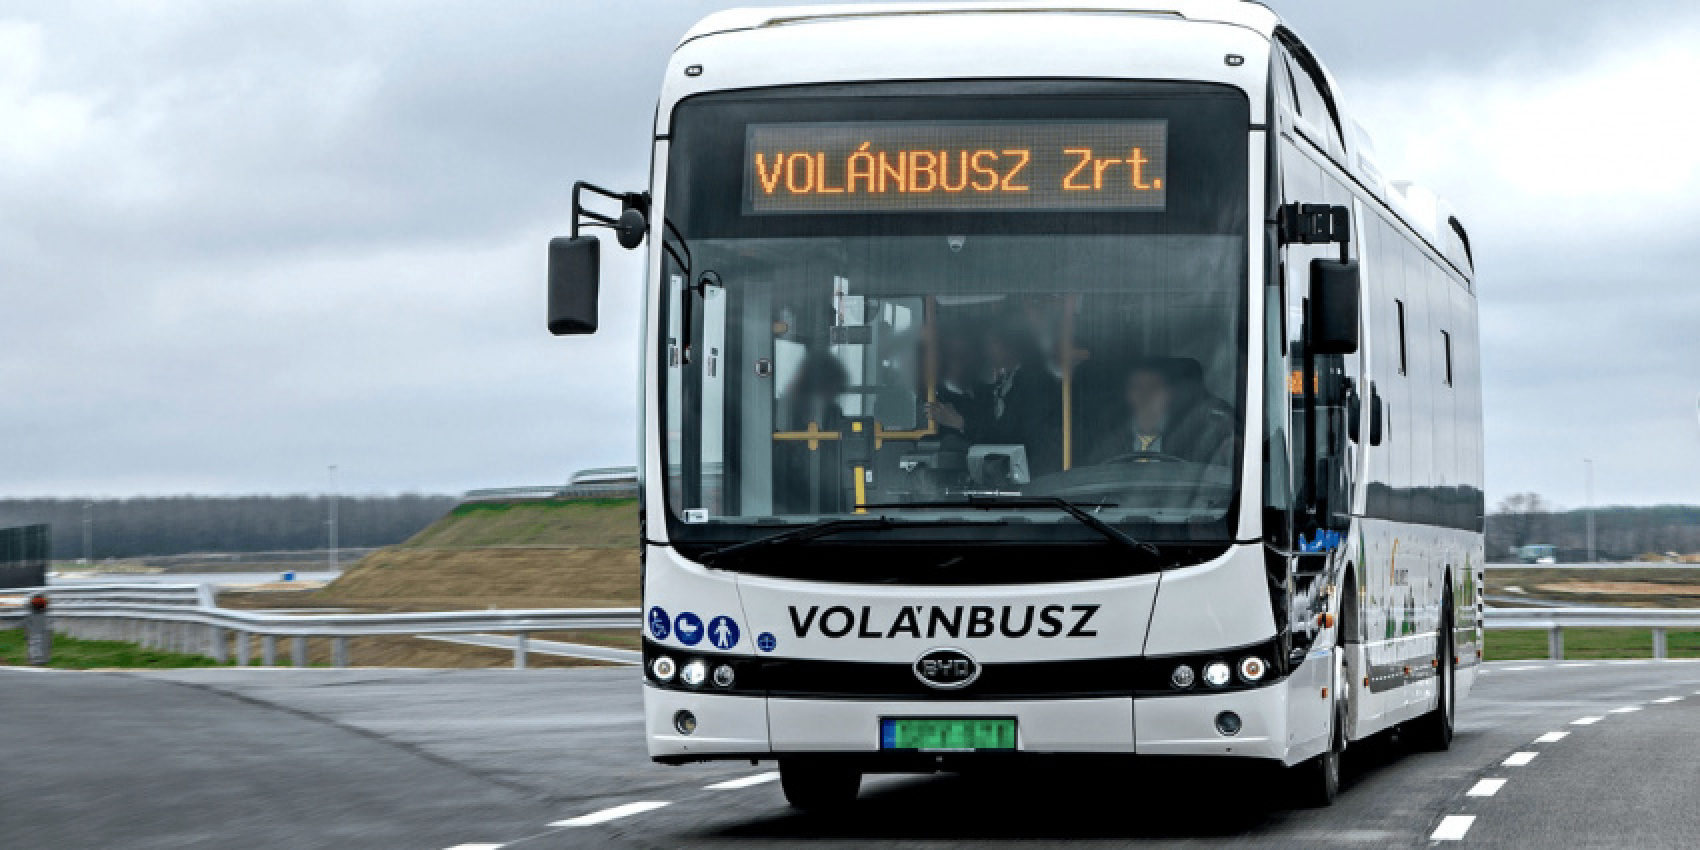 autos, byd, cars, electric vehicle, fleets, eger, electric buses, europe, győr, hungary, public transport, szeged, szolnok, volánbusz, zalaegerszeg, byd set to provide hungary with 48 electric buses